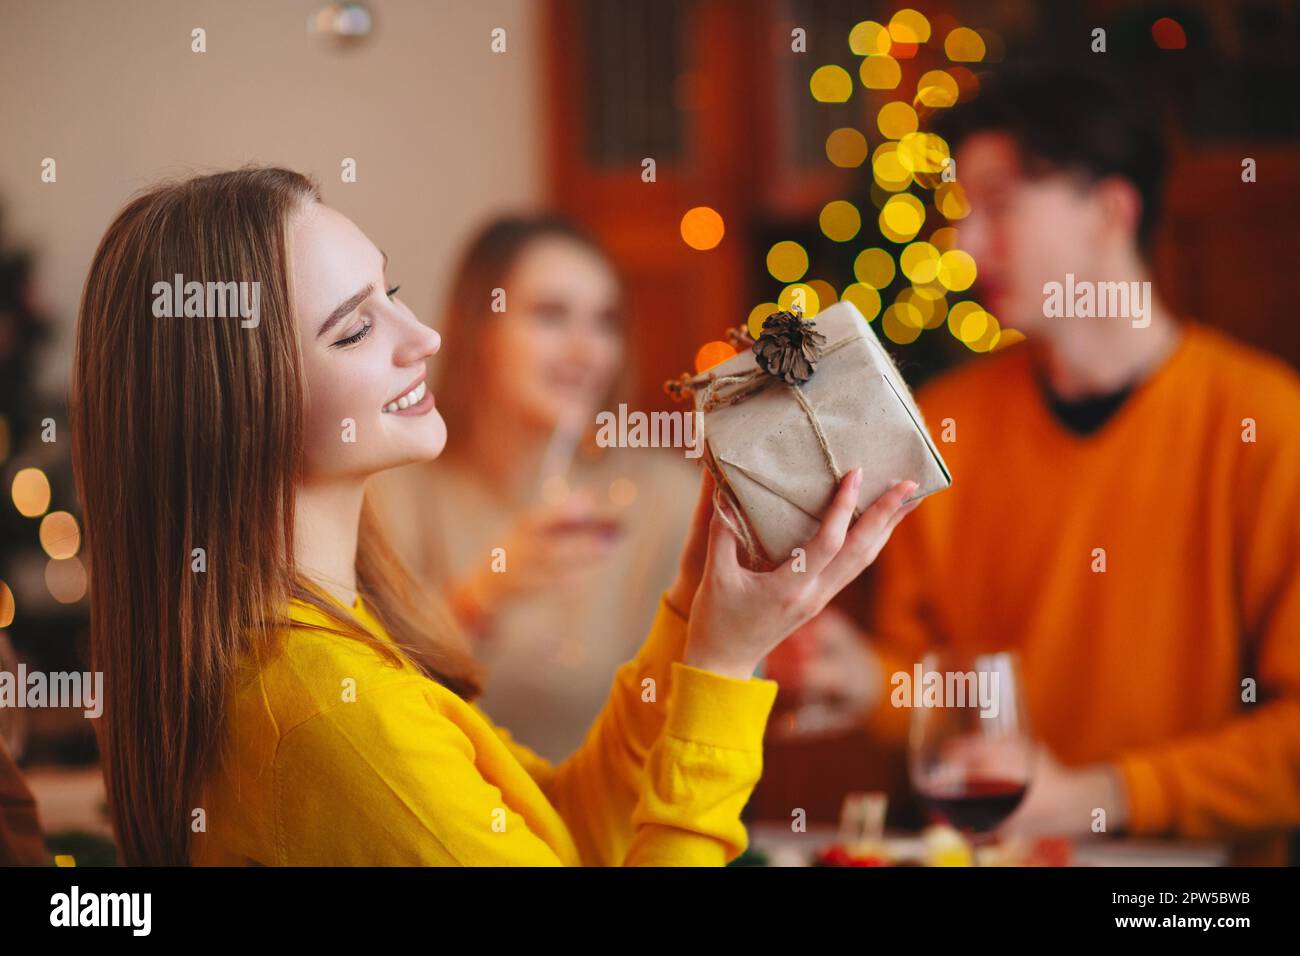 Young person giving wrapped gift to friend while sitting at table and celebrating Christmas together Stock Photo